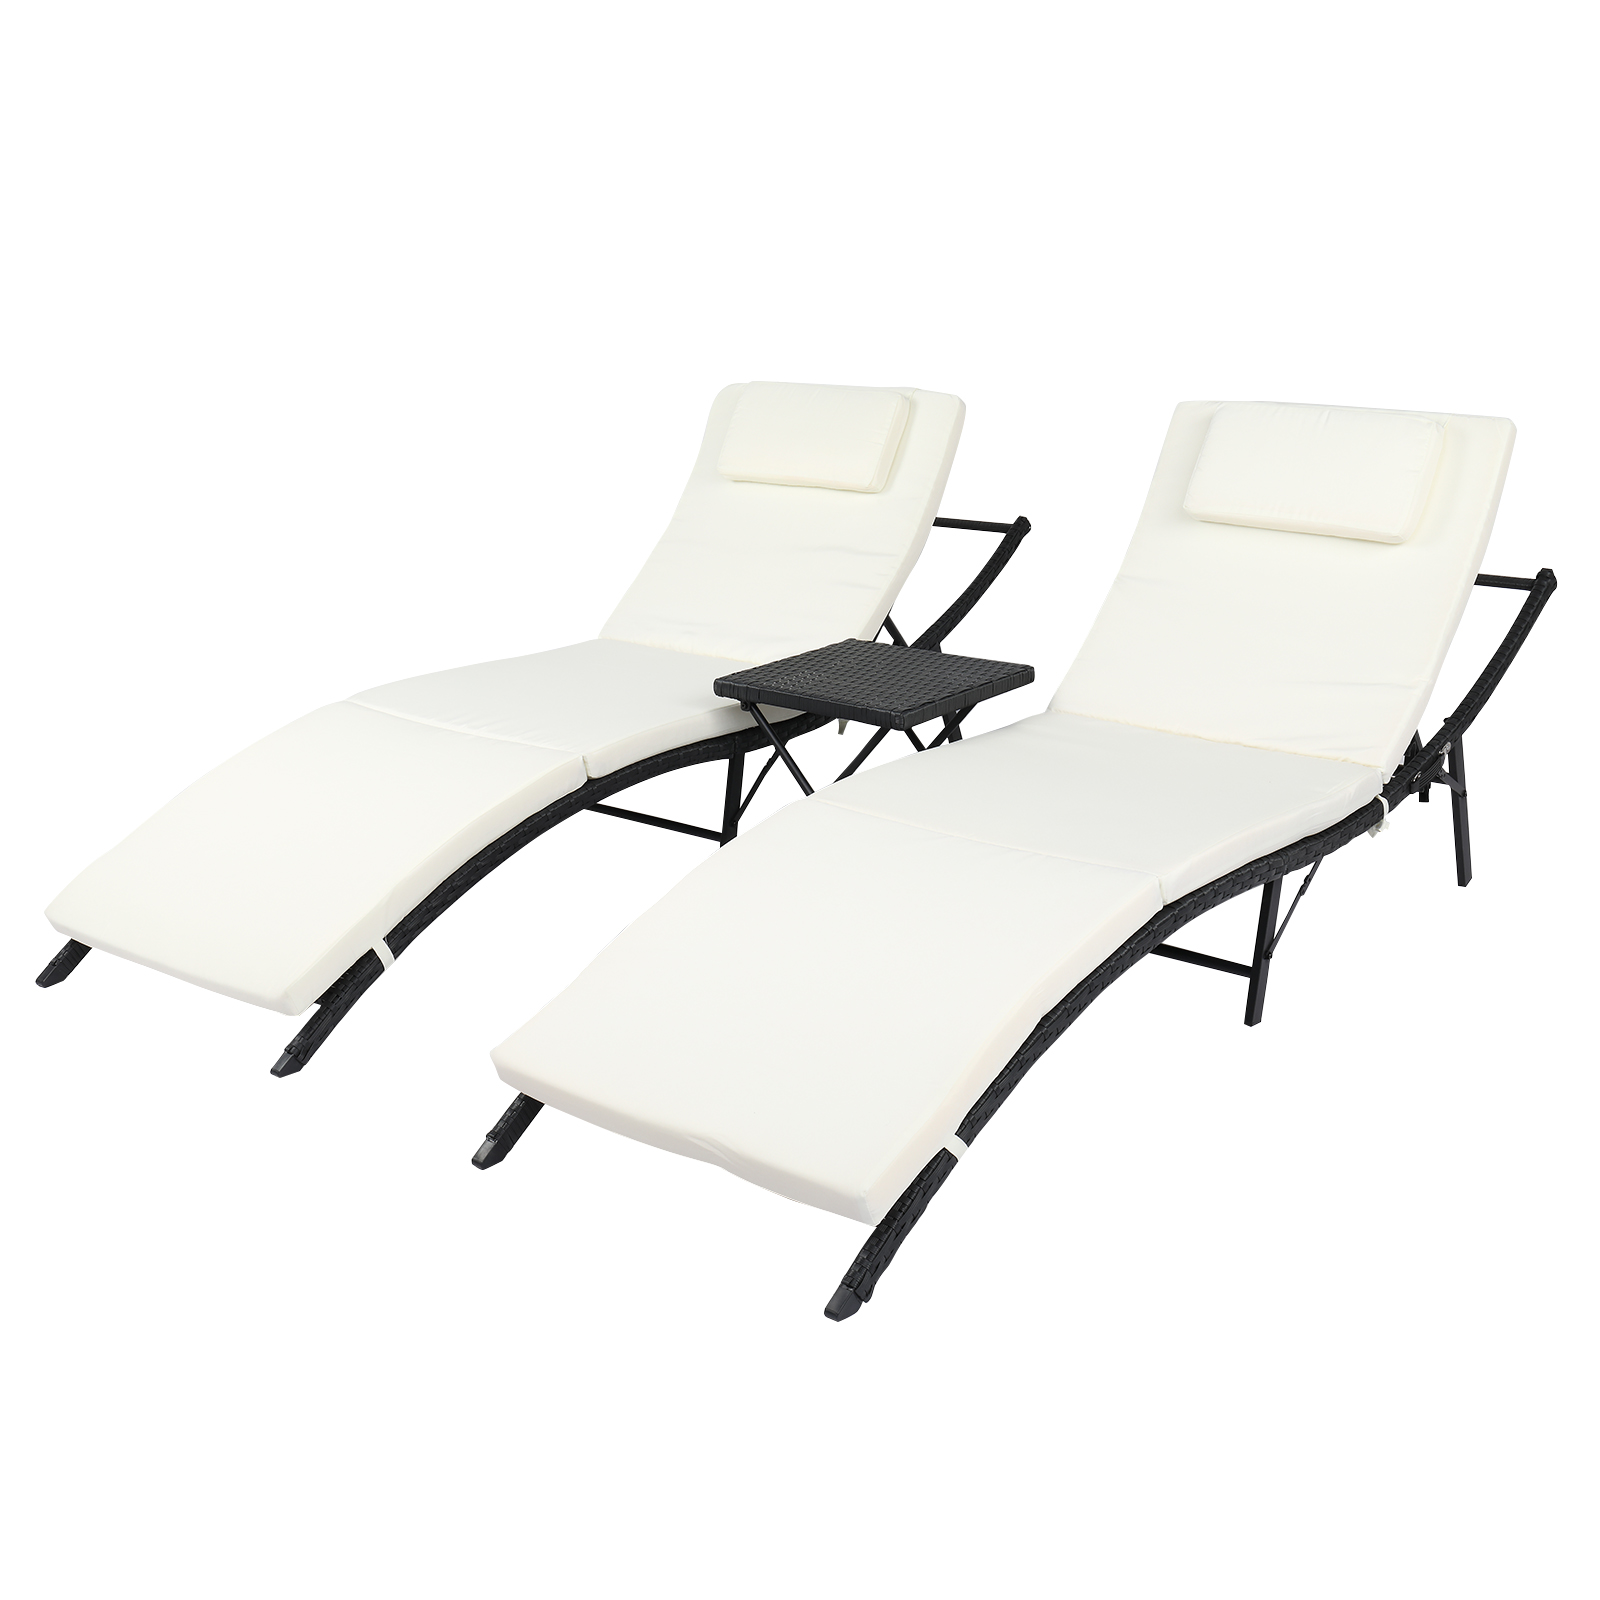 Outdoor Chaise Lounge Set of 3, BTMWAY Patio Wicker Lounge Chairs w/Coffee Table, Adjustable Backrest, Cushions, Rattan Sunbathing Reclining Lounge Chairs for Outside, Pool Lounge Furniture, AA3237 - image 1 of 11